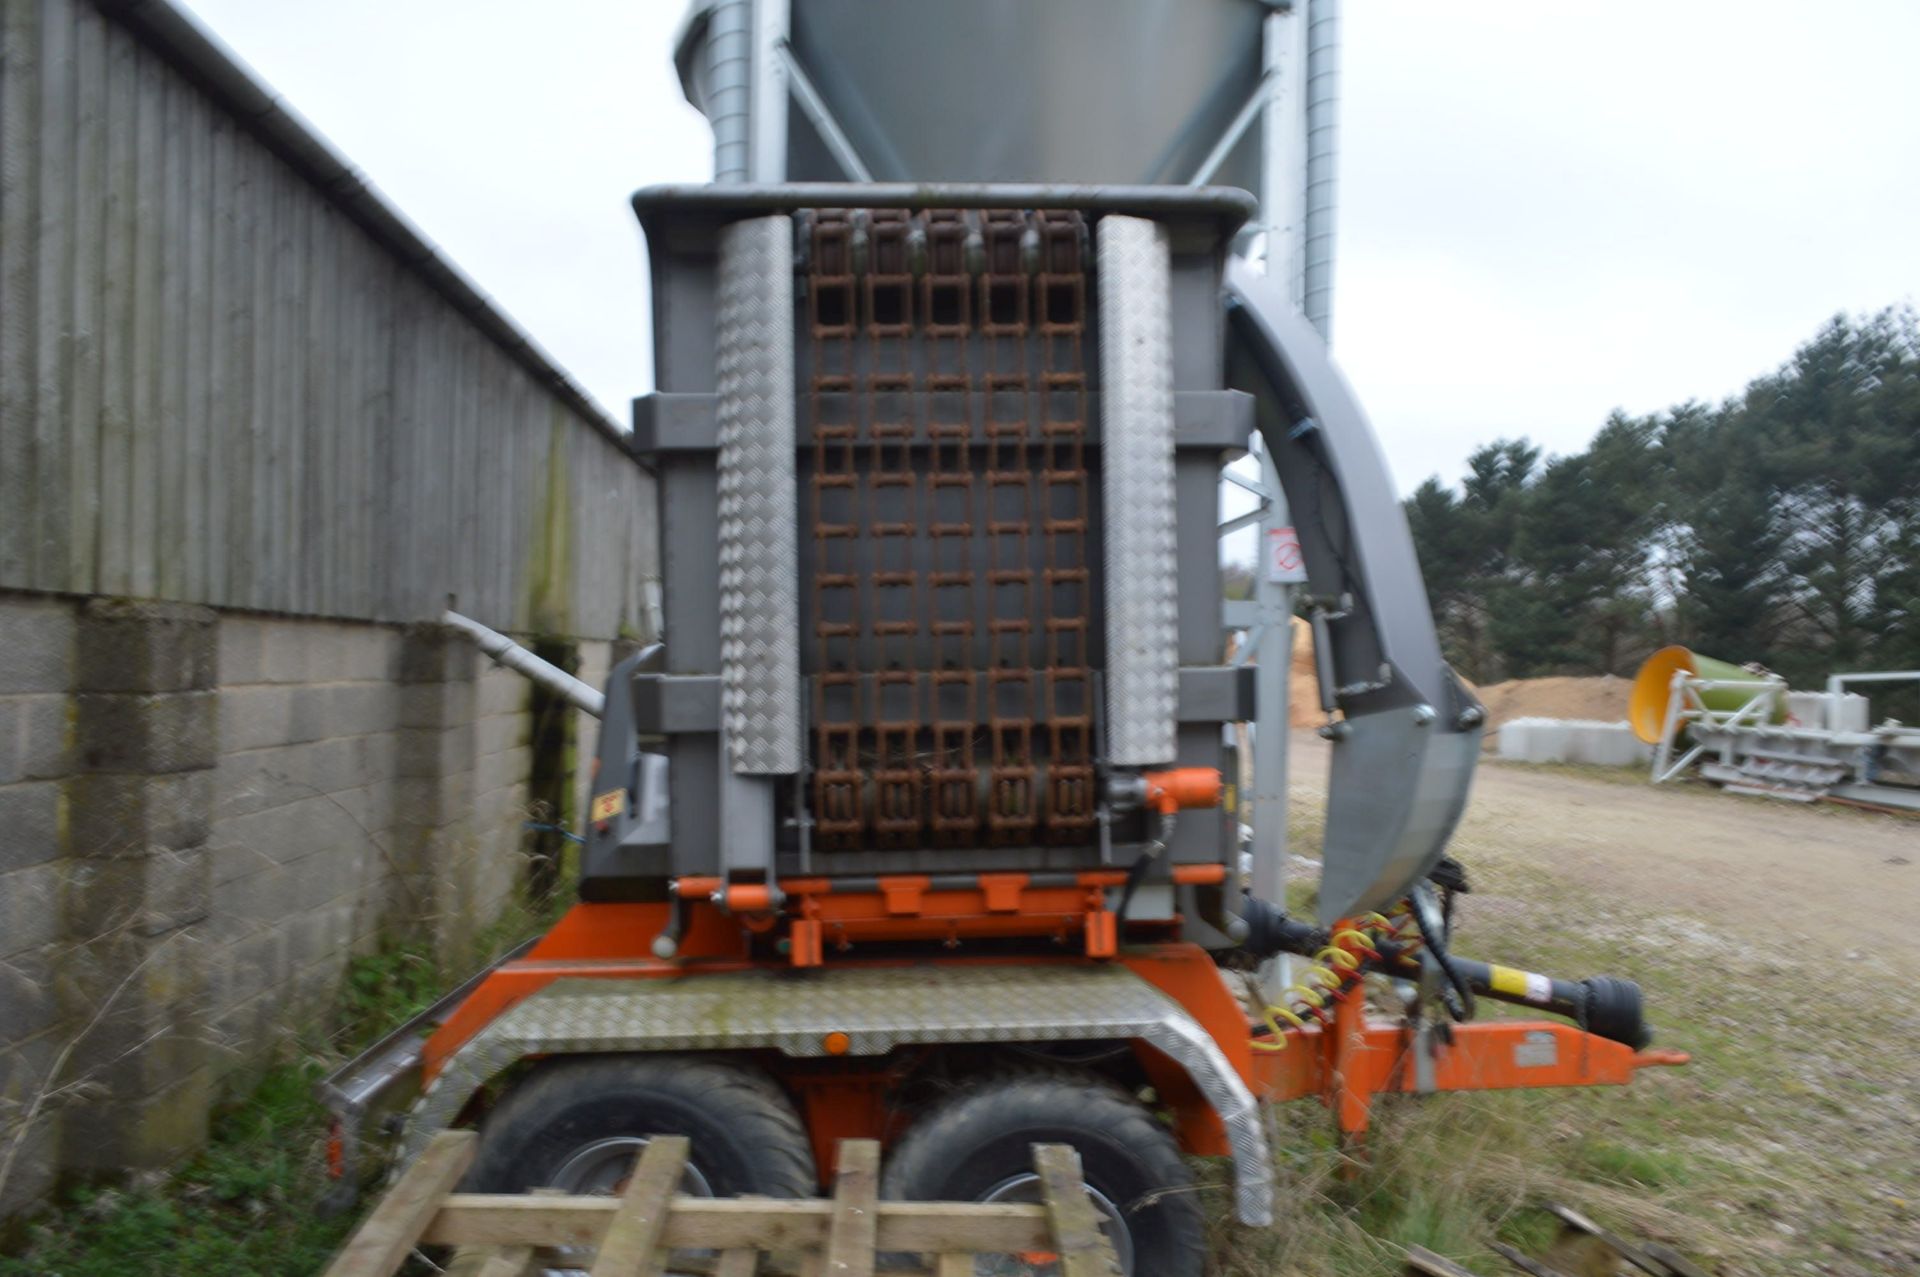 Gandini Meccanica CT40/75TTS MOBILE WOOD CHIPPER, serial no. CT40453, year of manufacture 2014, with - Image 4 of 11